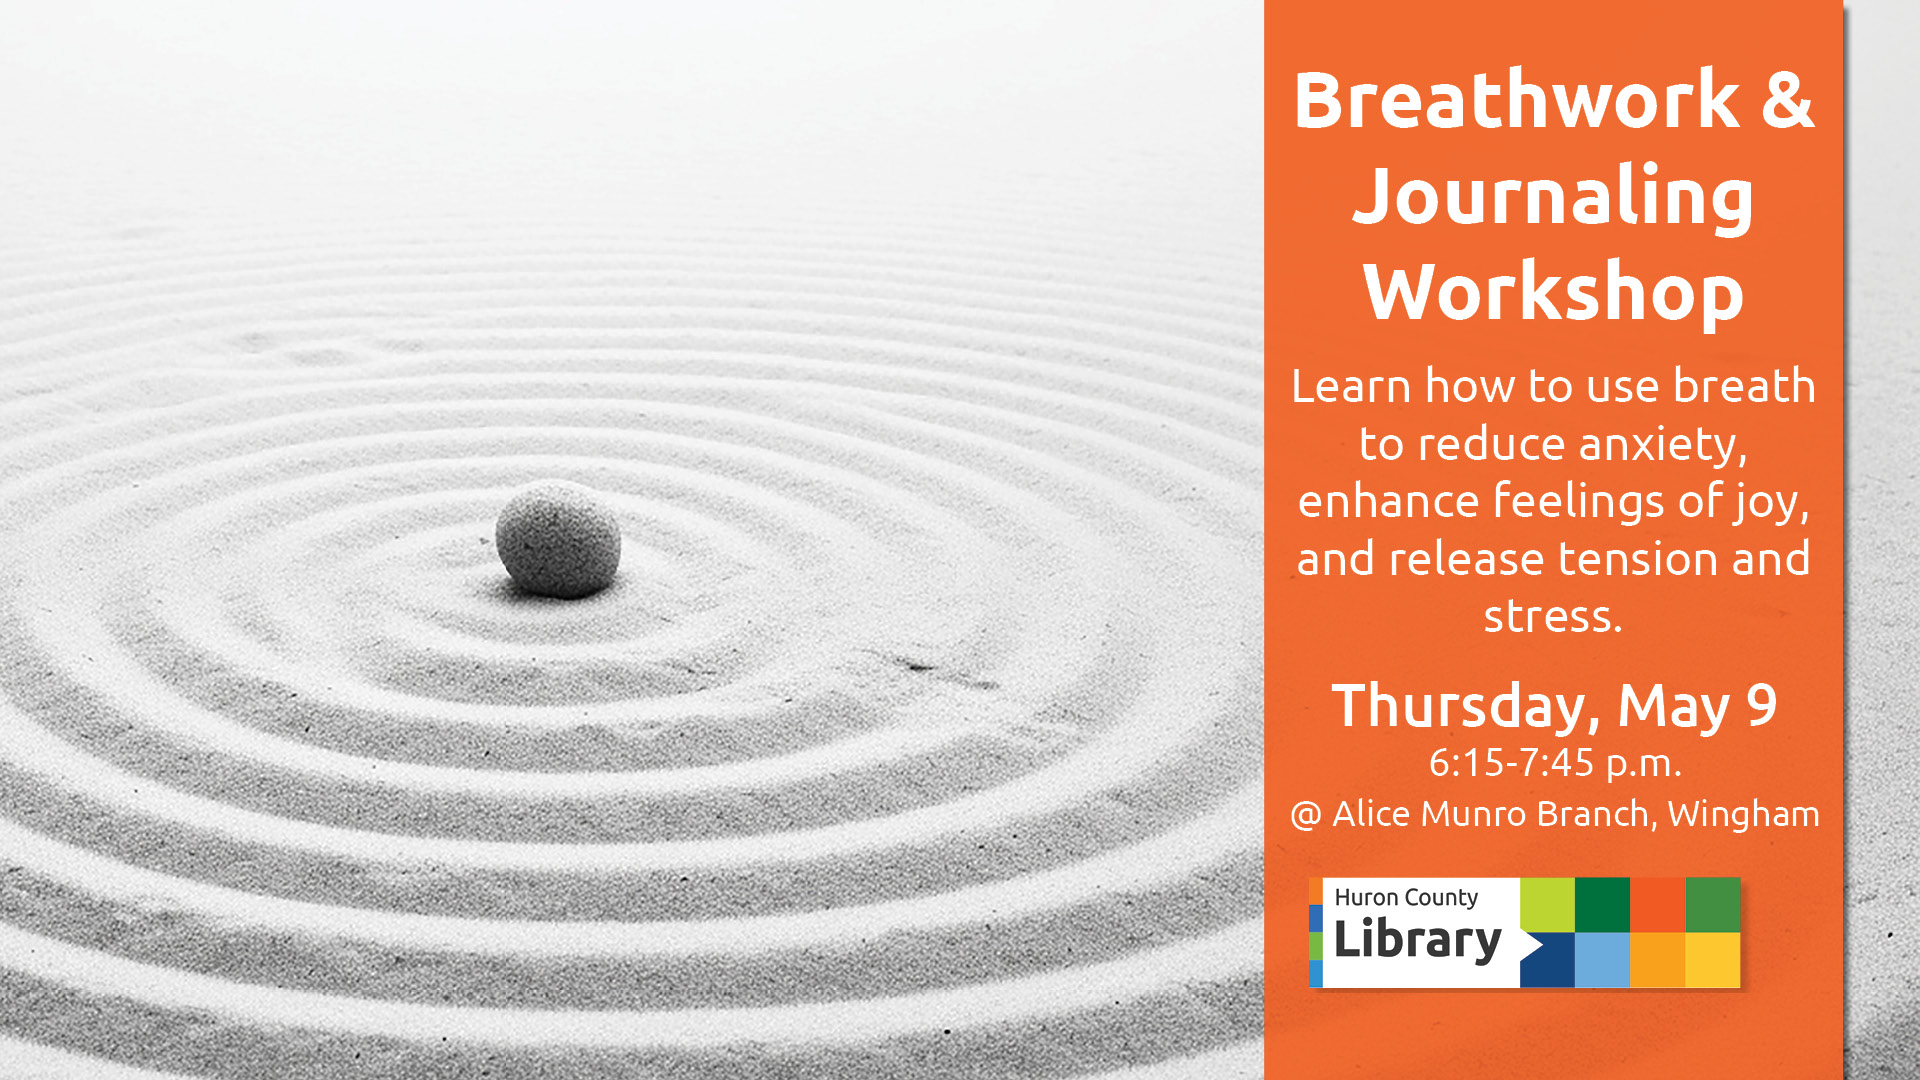 Photo of rippled sand with text promoting Breathwork and Journaling Workshop at Wingham